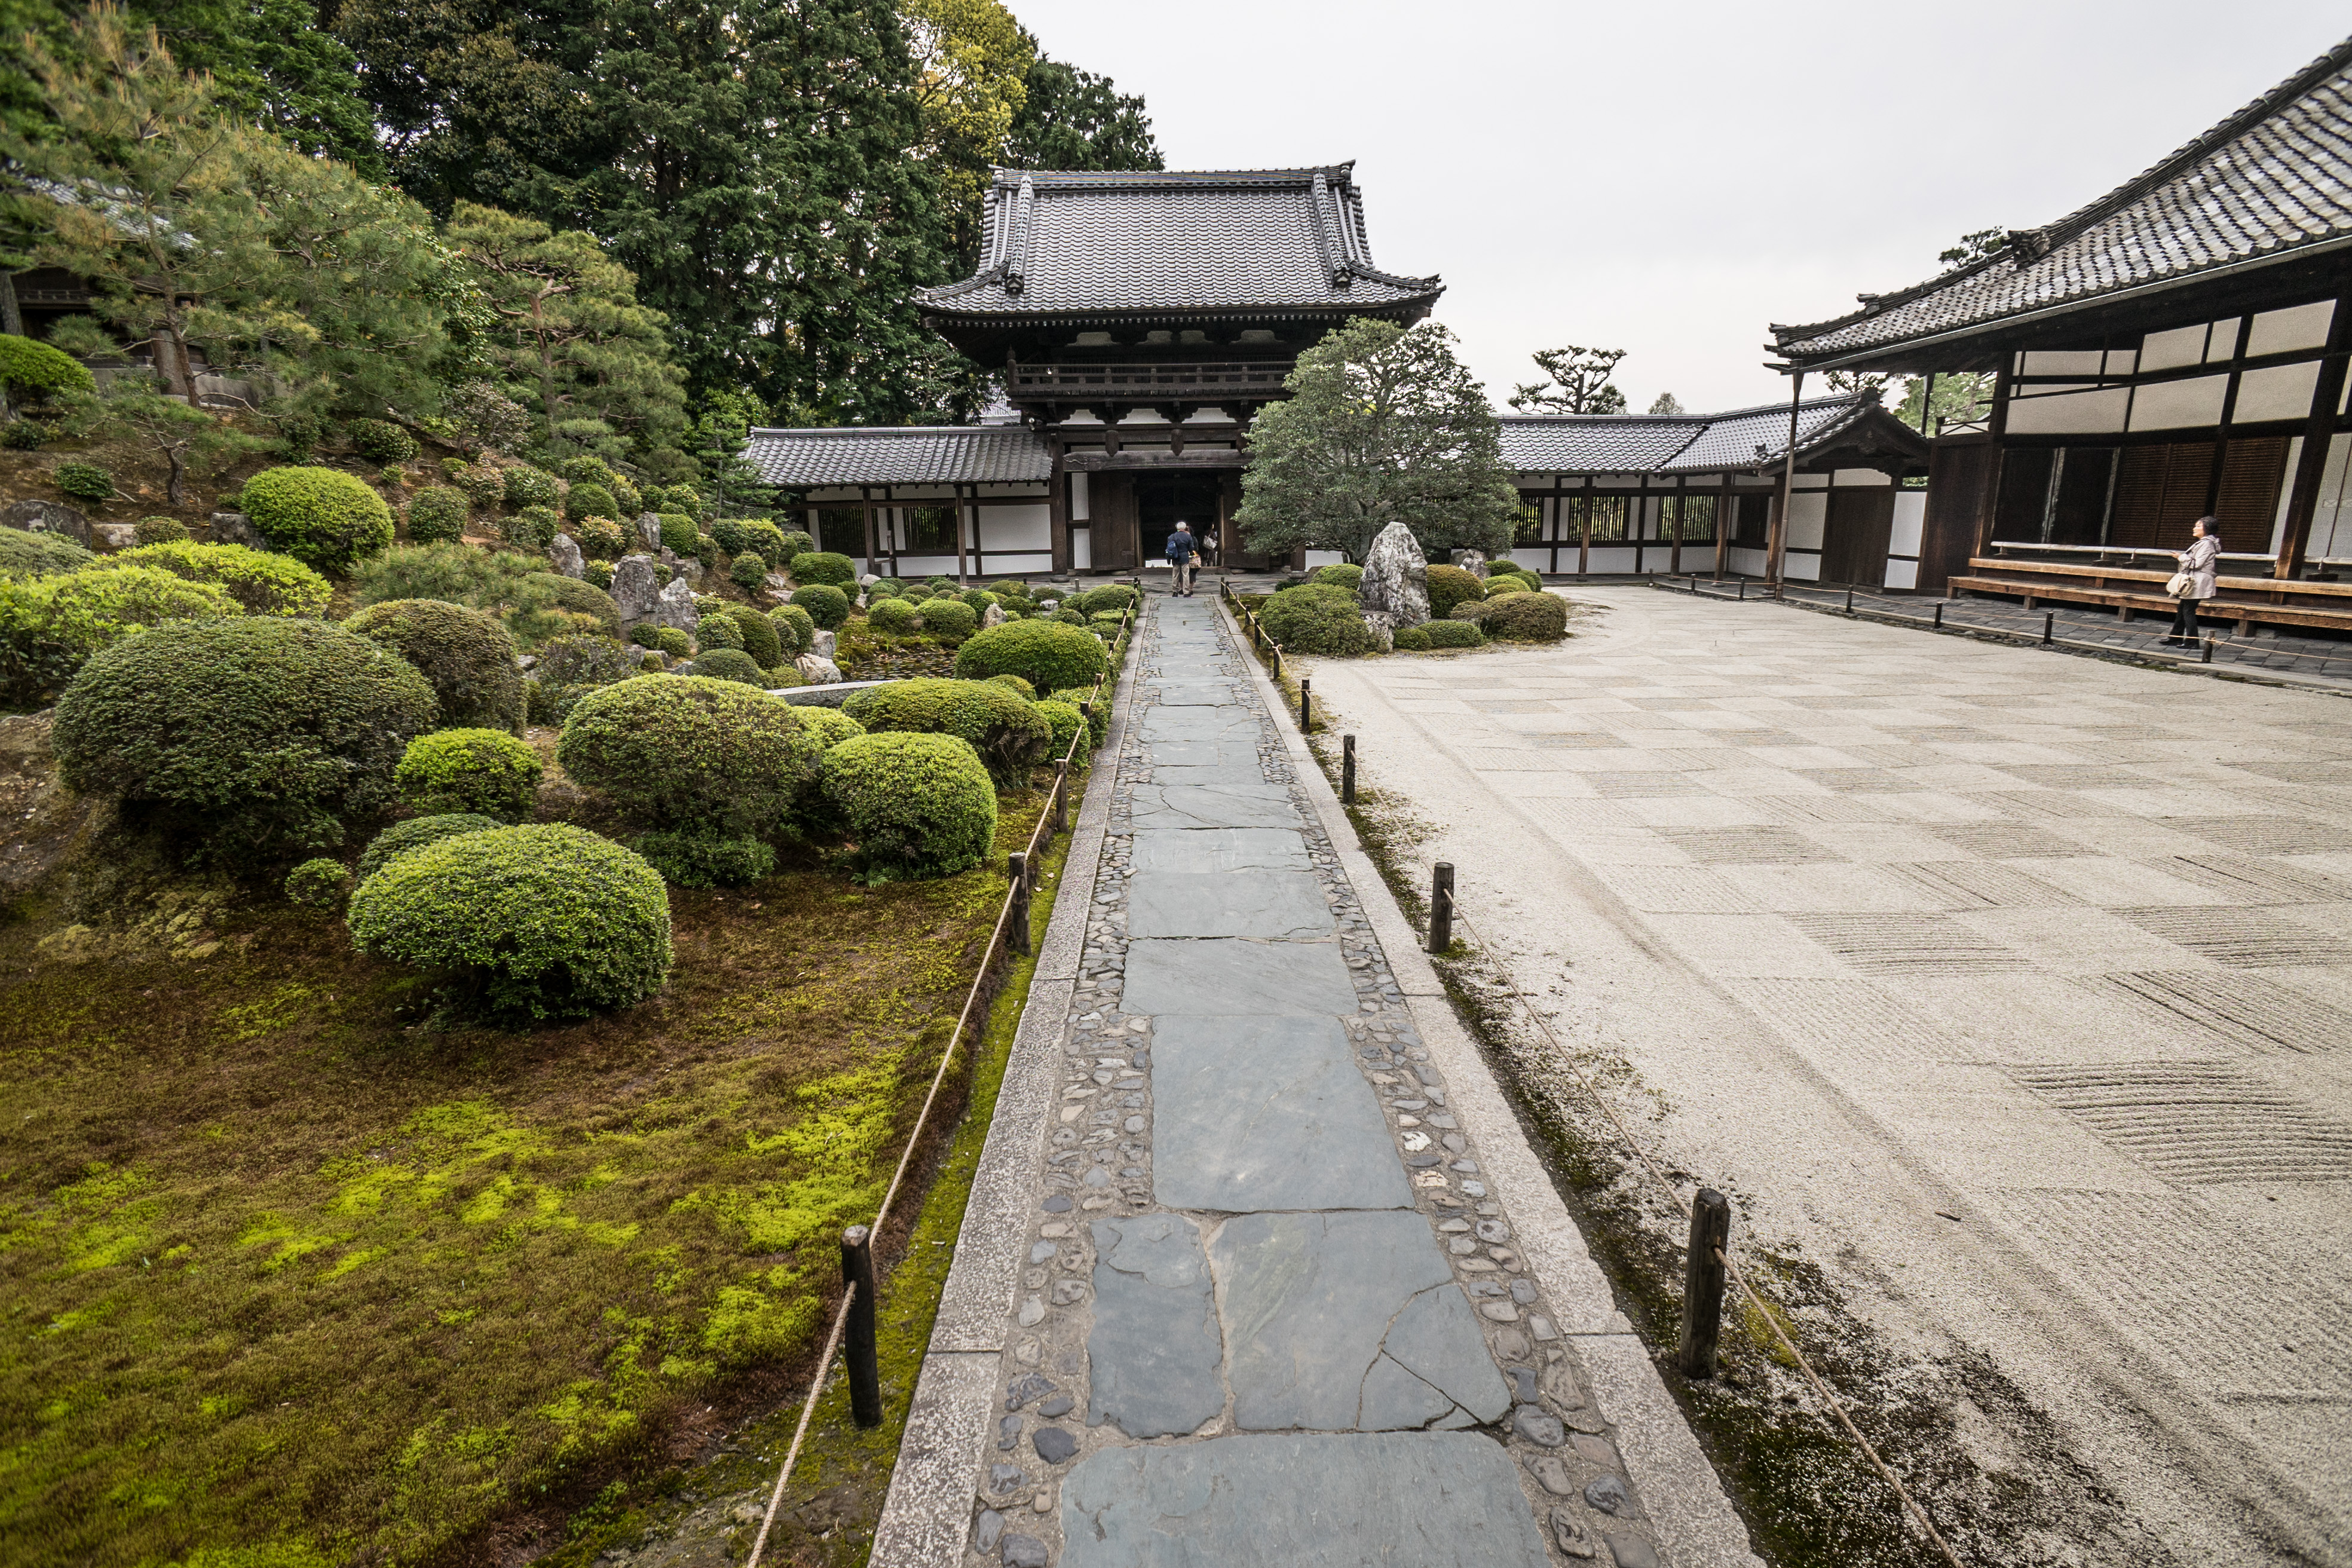 Japan Day 9: The shrines of Kyoto